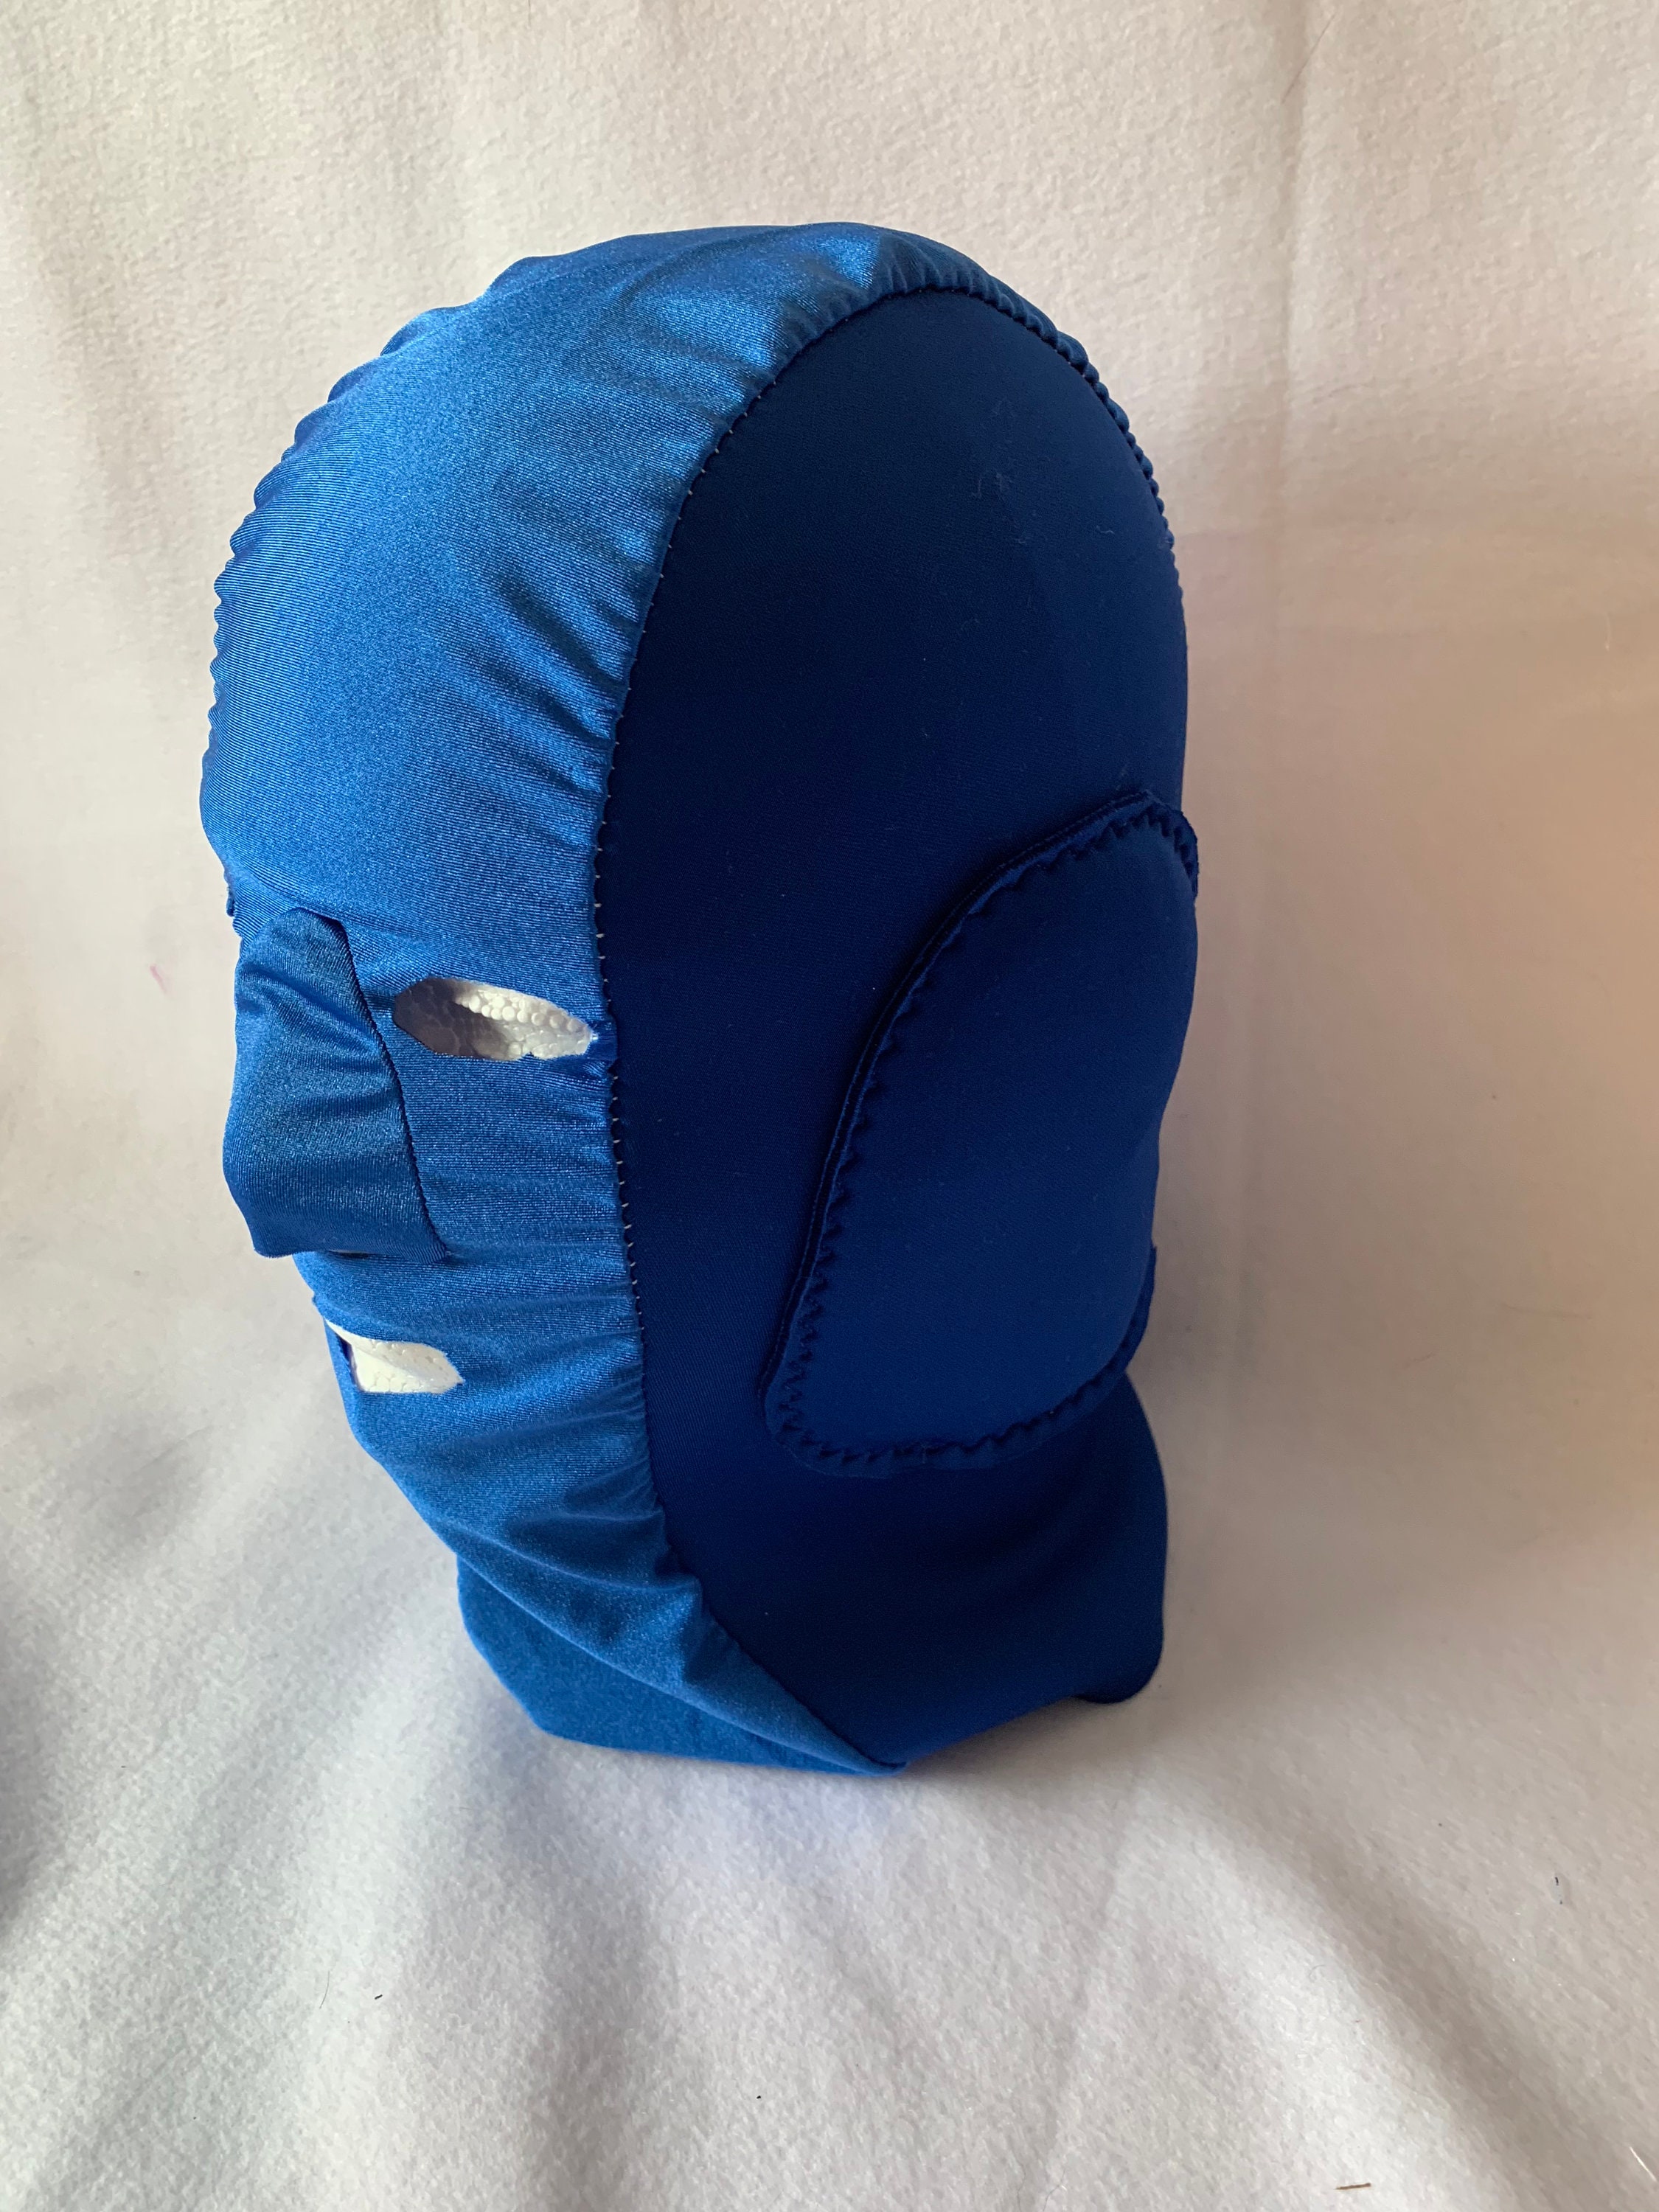 Full cover Lycra compression mask for adult autism therapy | Etsy